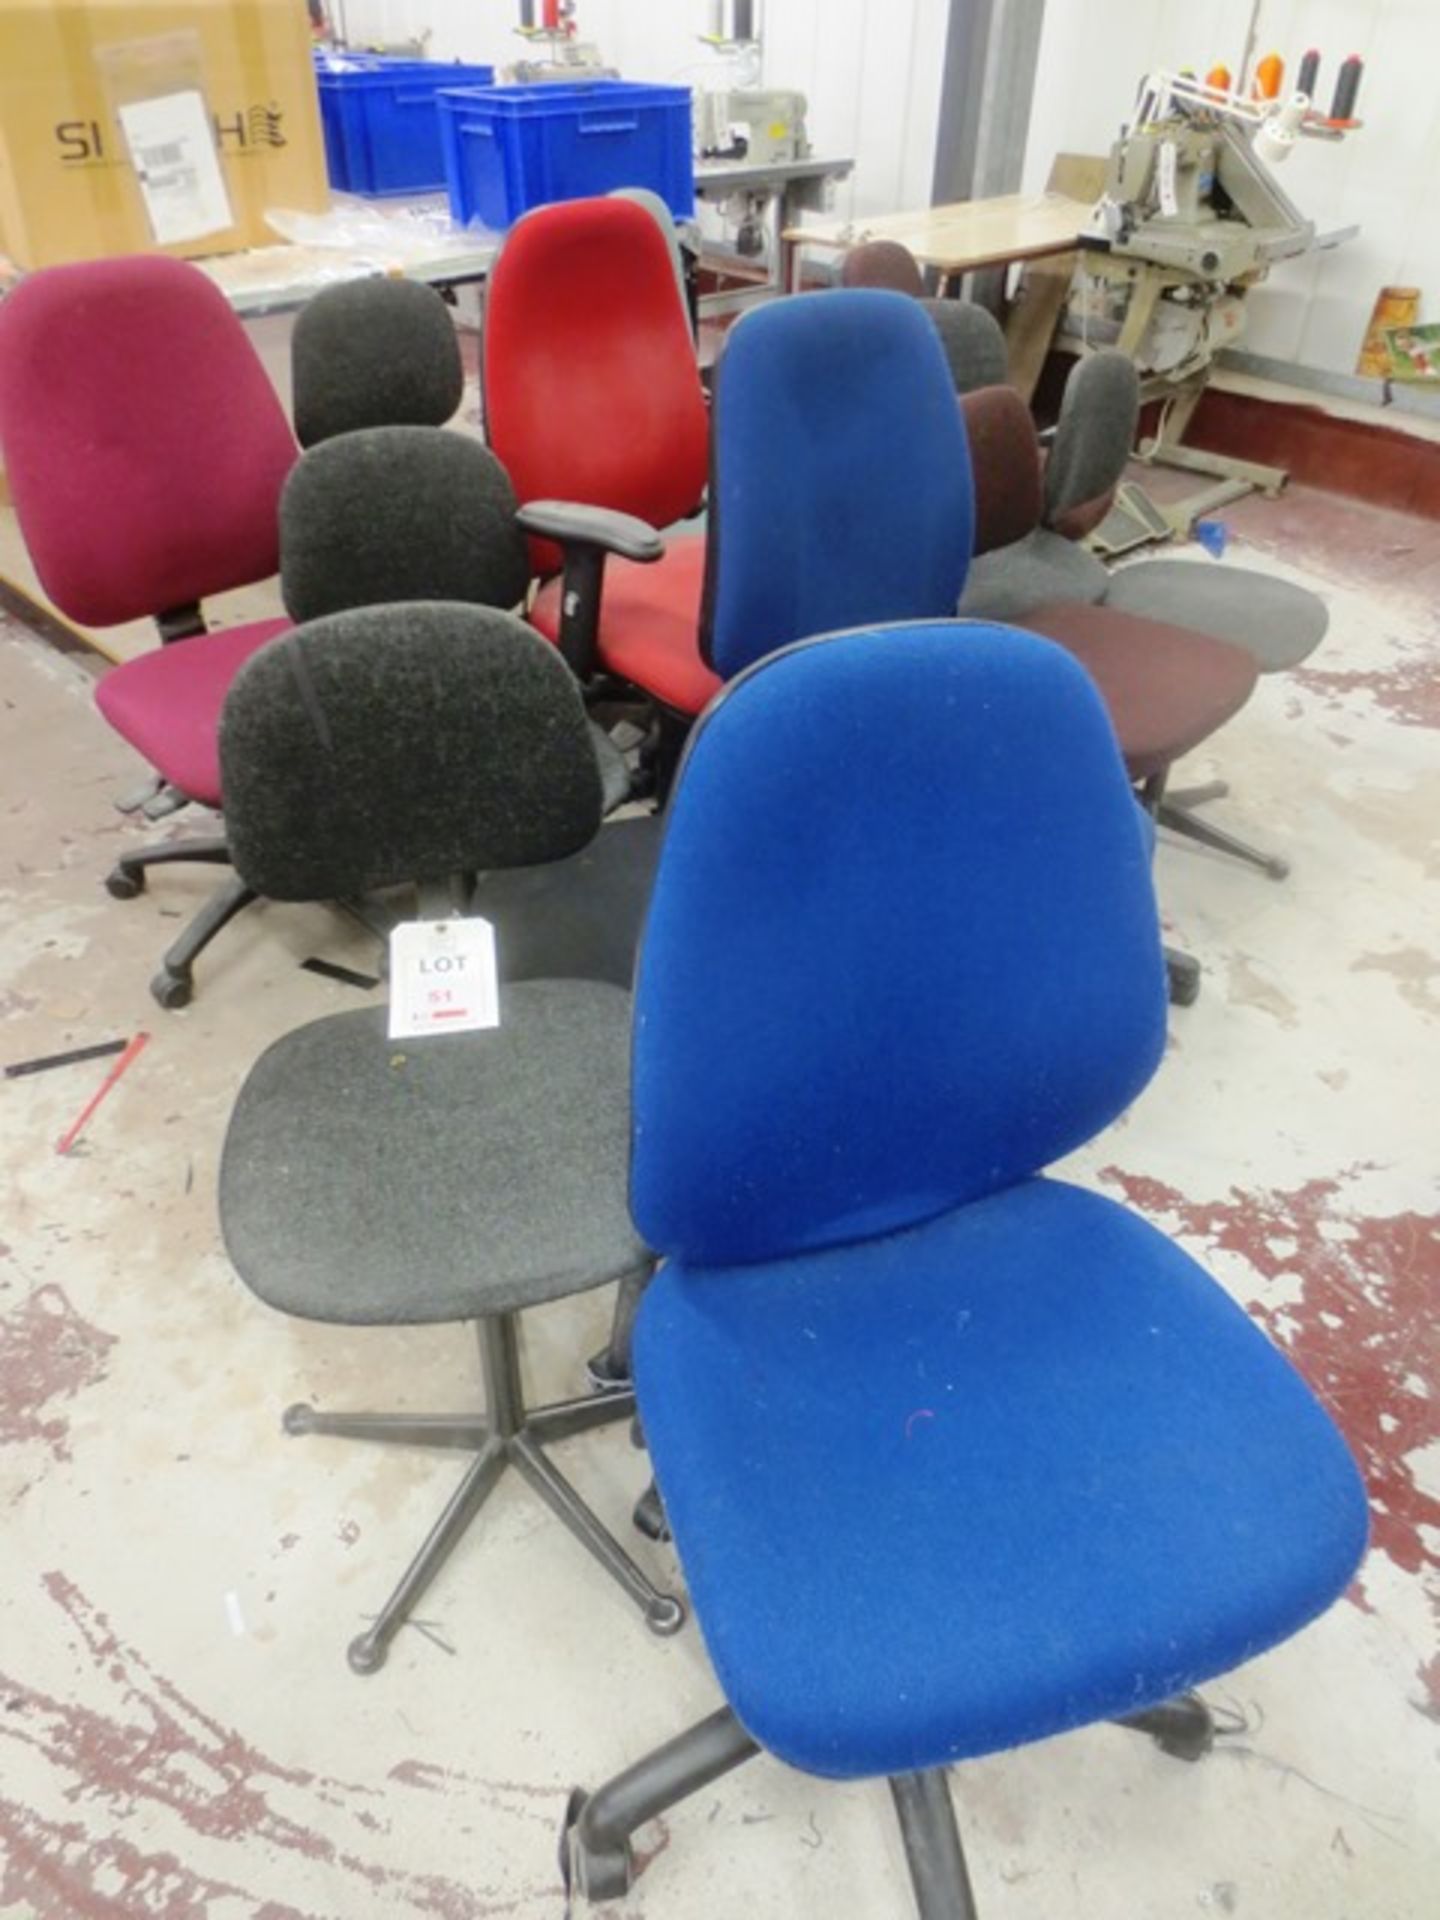 Fourteen assorted cloth upholstered chairs